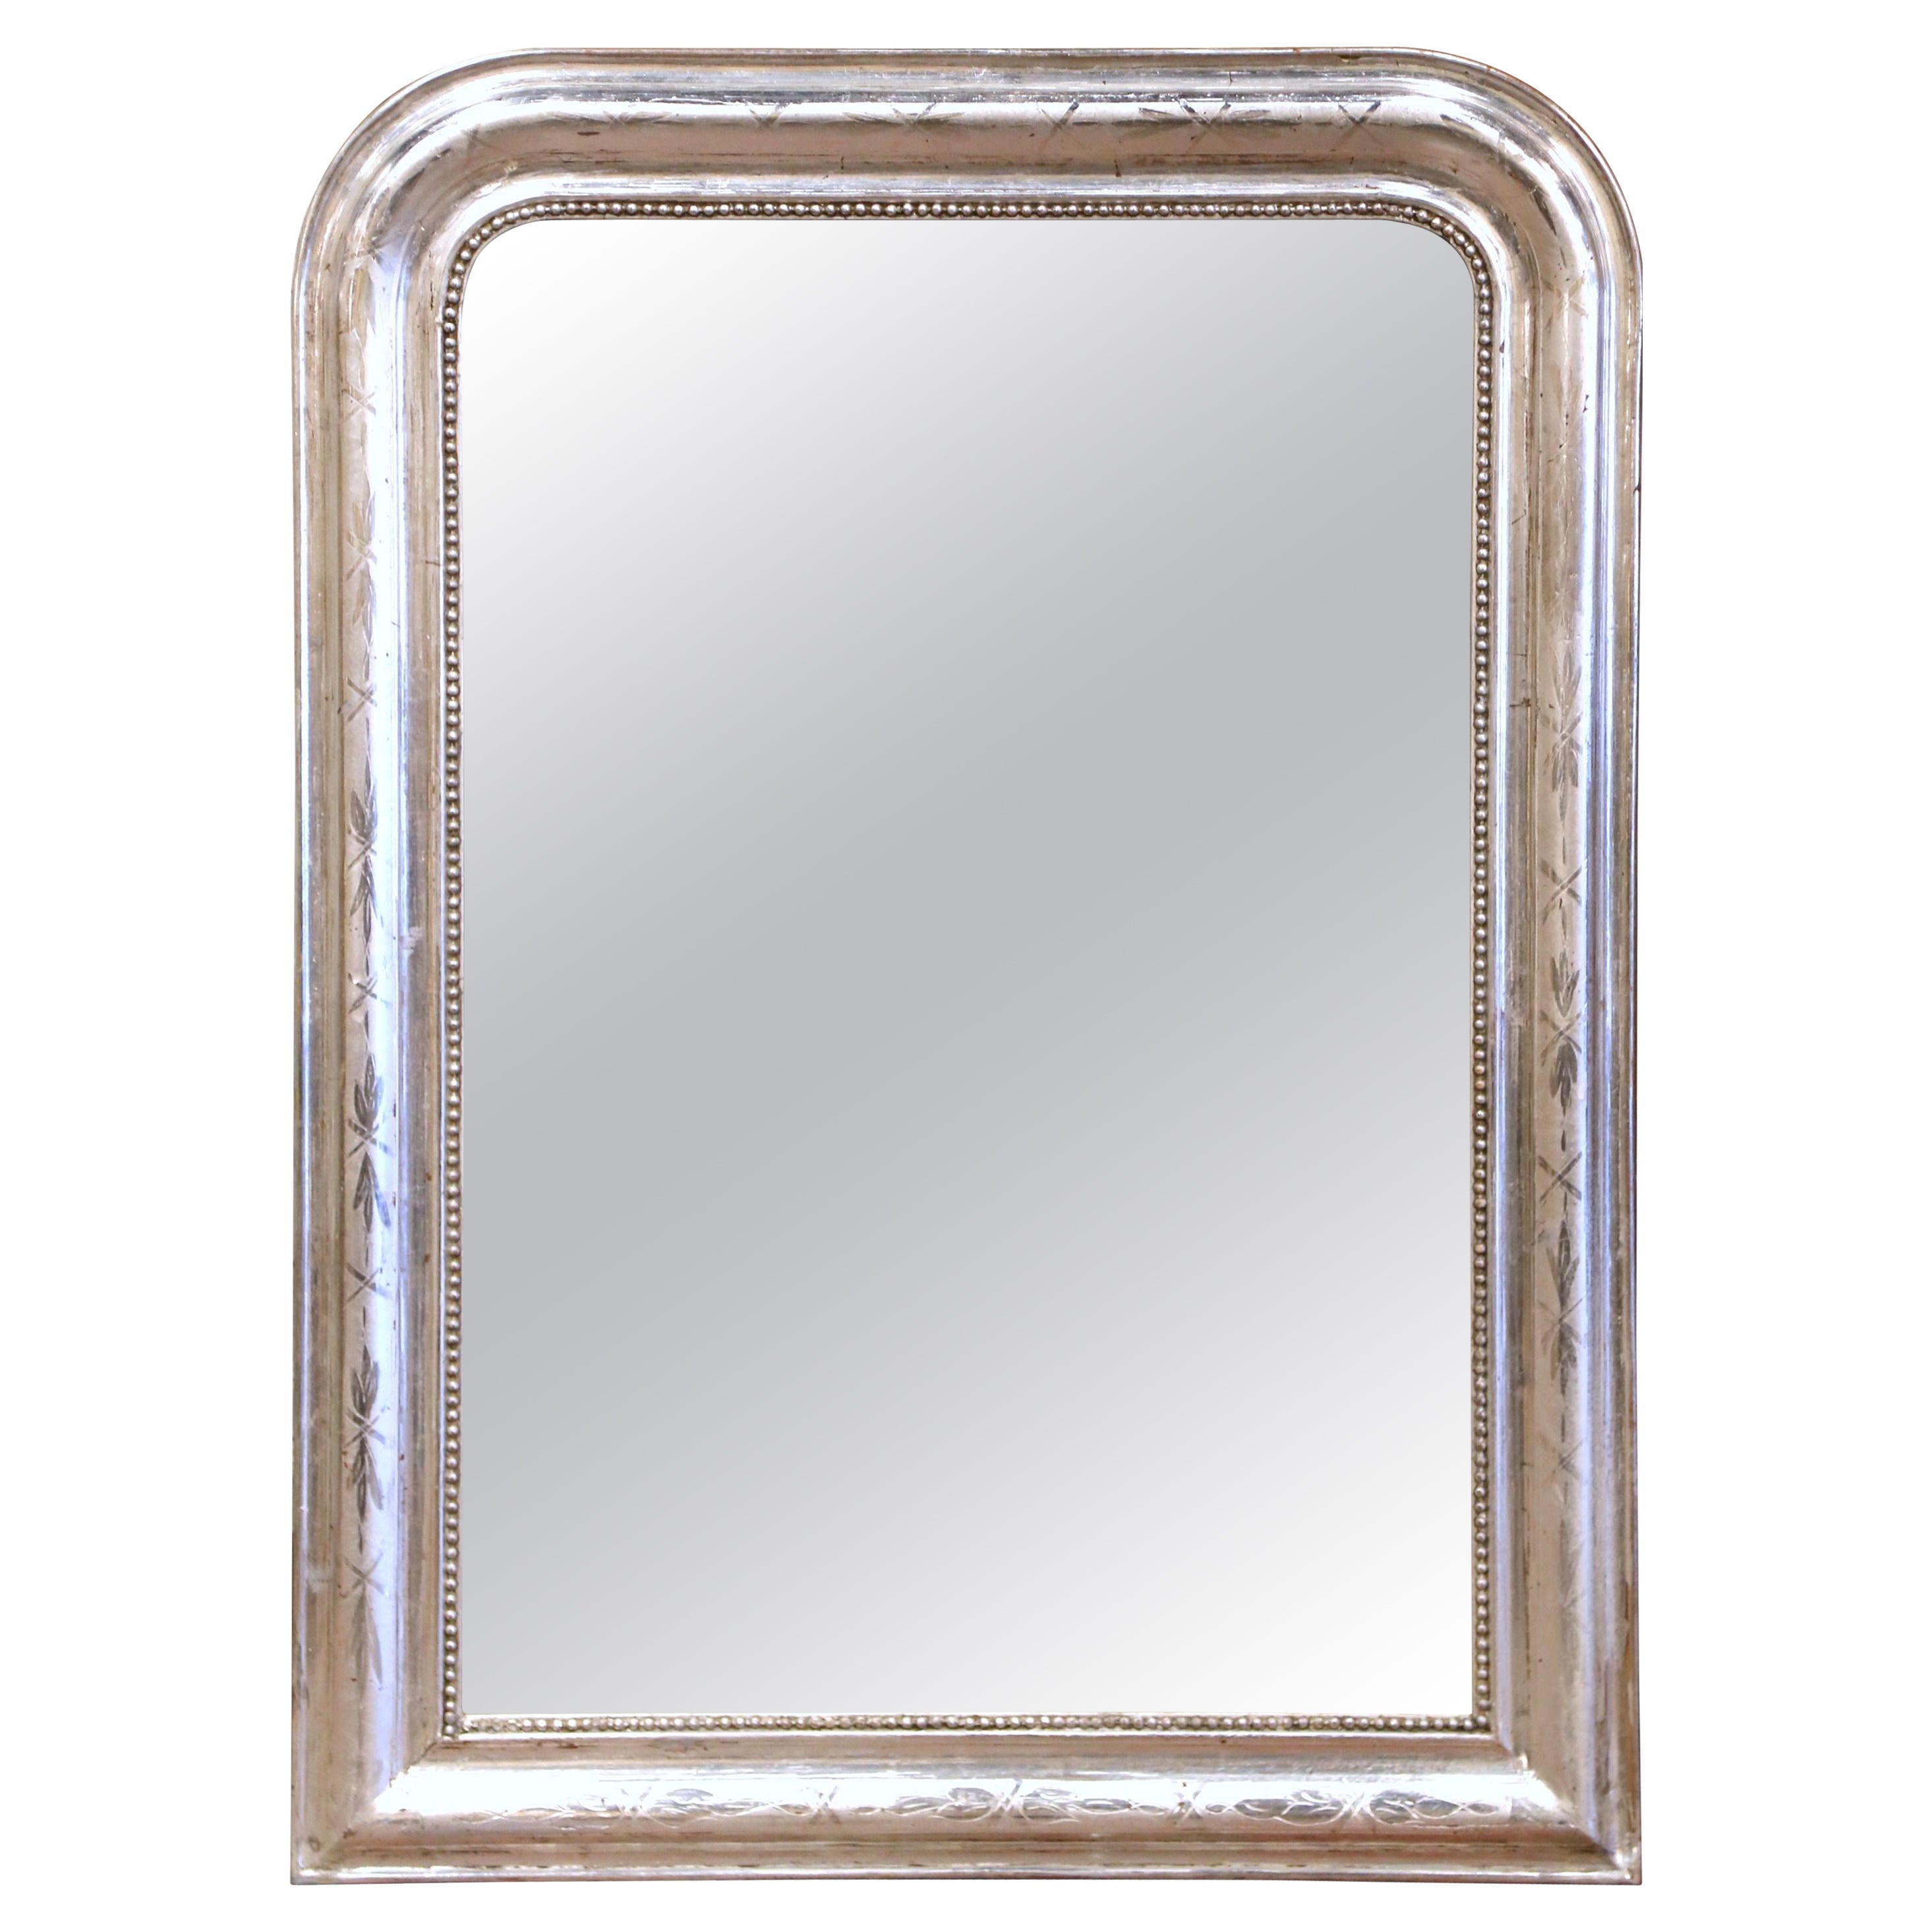 19th Century, French Louis Philippe Silver Leaf Wall Mirror with Floral Motifs